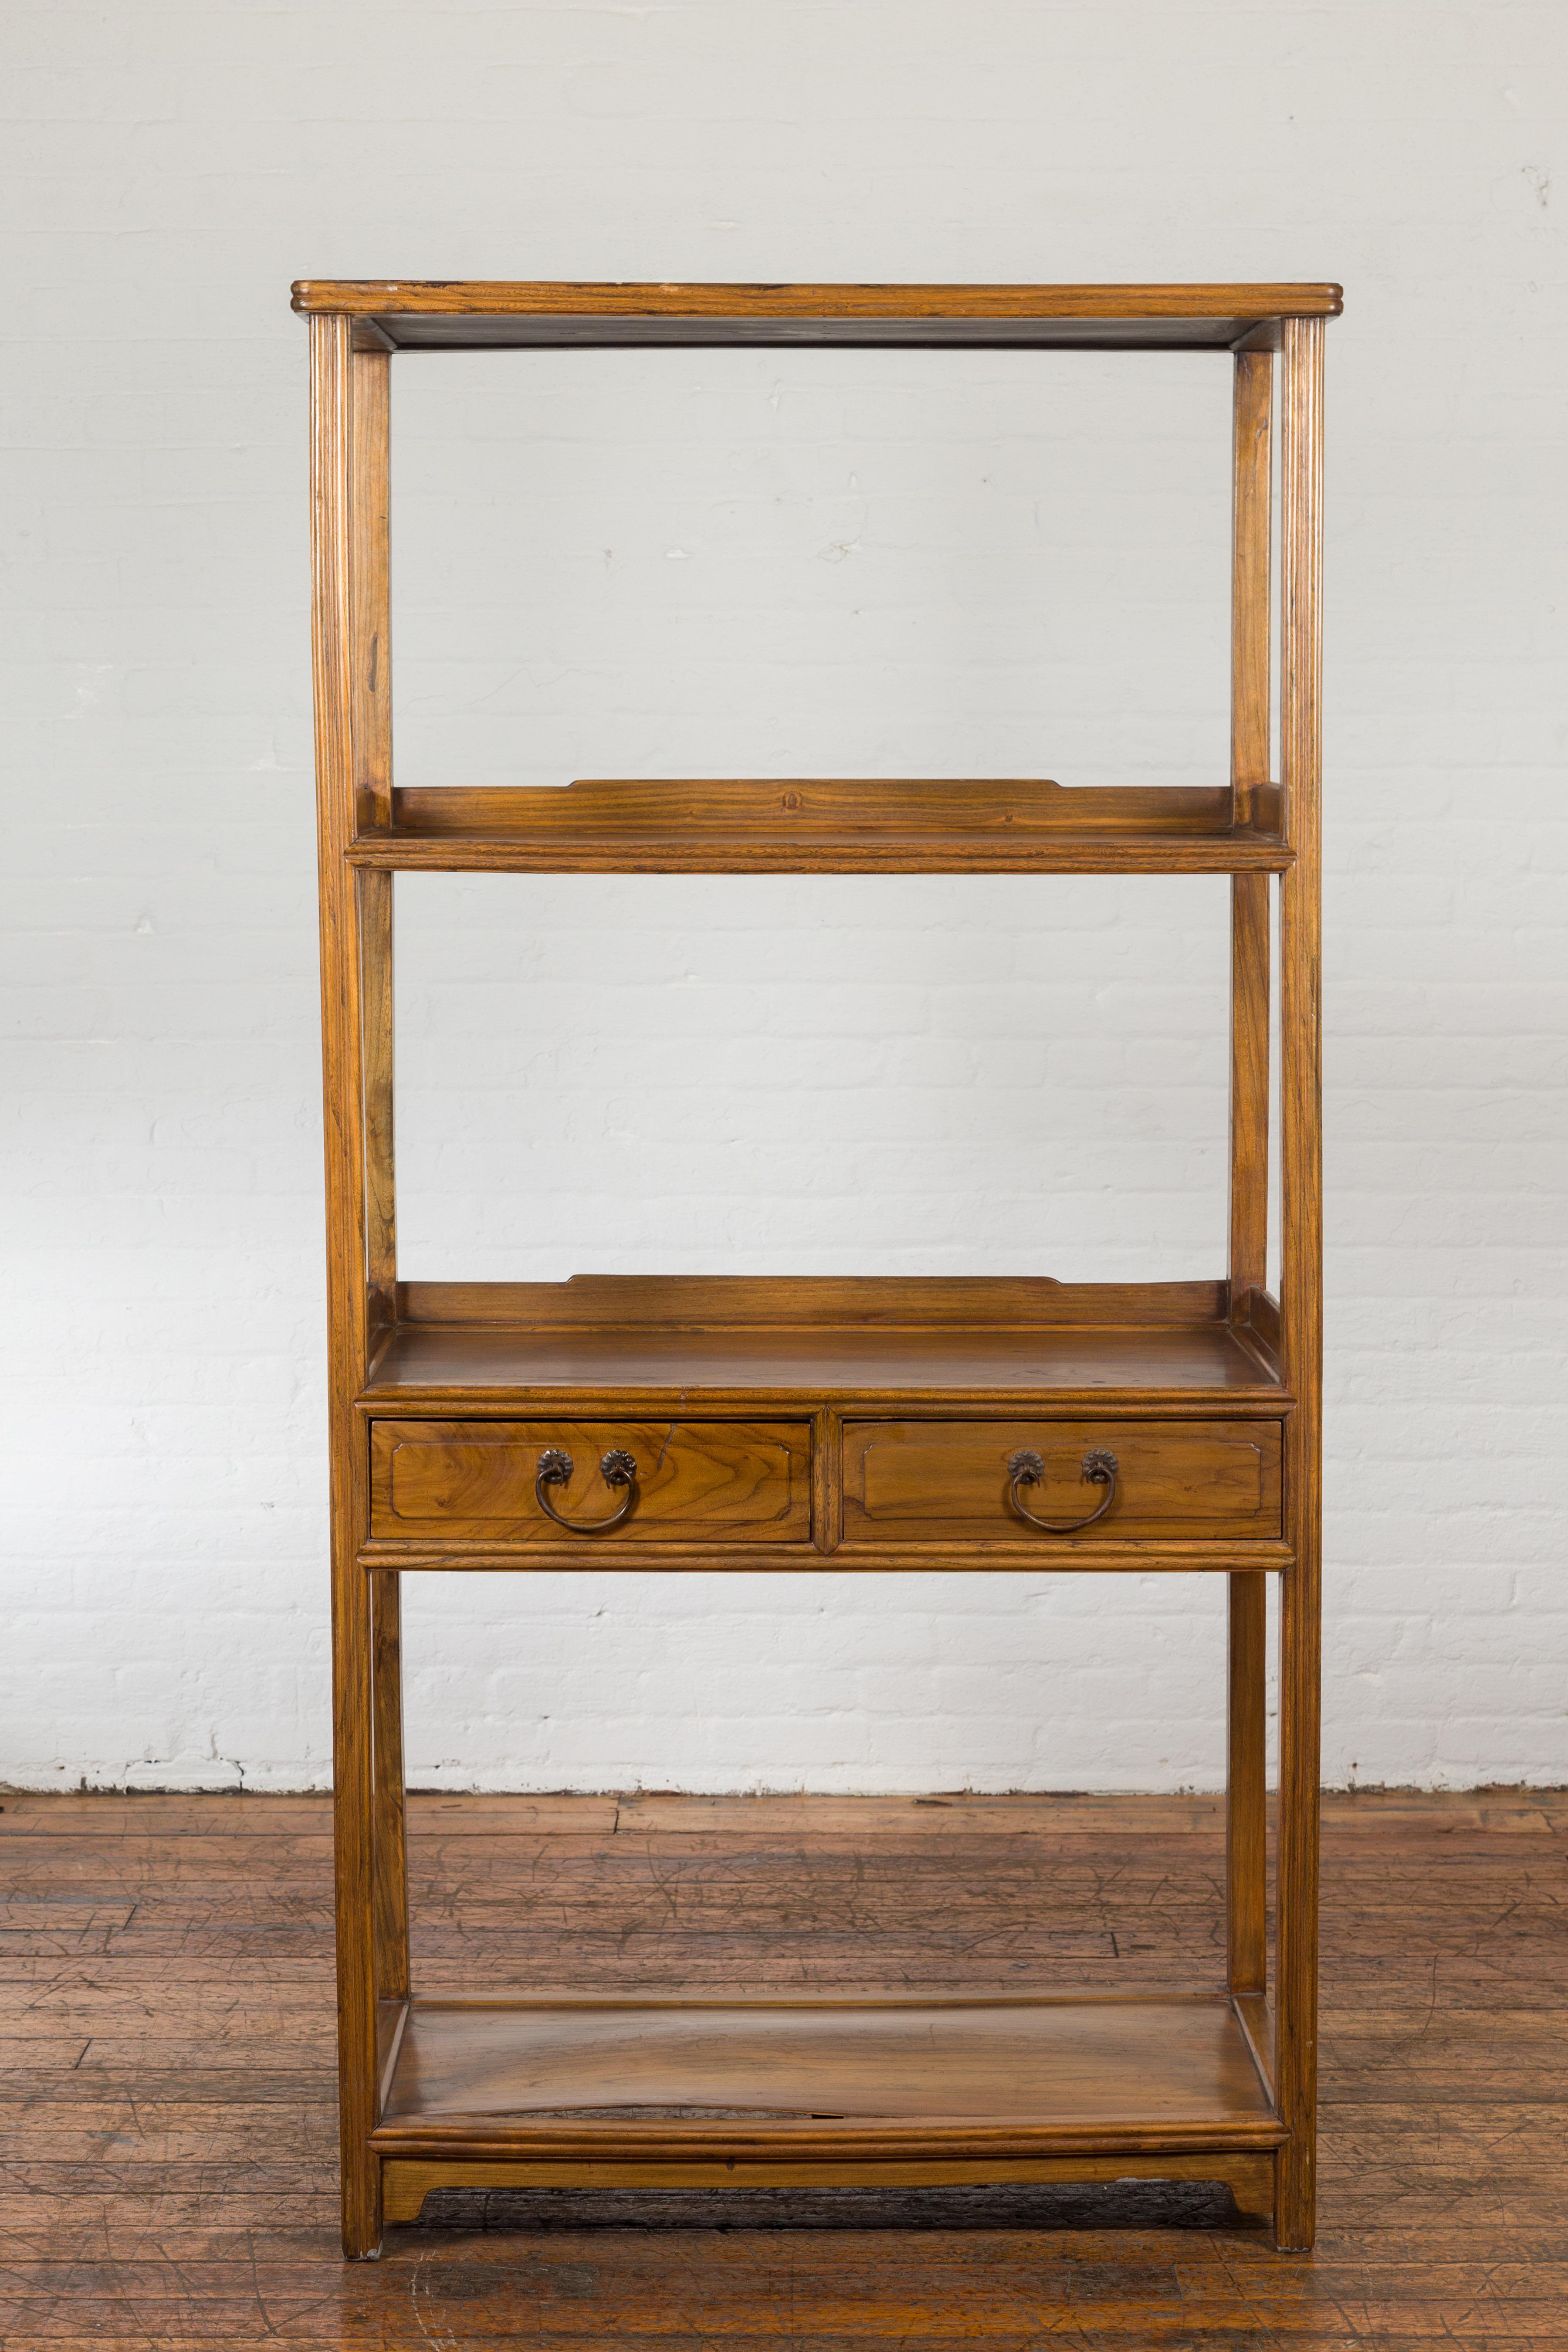 A Chinese late Qing Dynasty period bookcase from the early 20th century with classic design, four shelves and two drawers. Created in China during the late Qing Dynasty period in the early years of the 20th century, this wooden bookcase features a